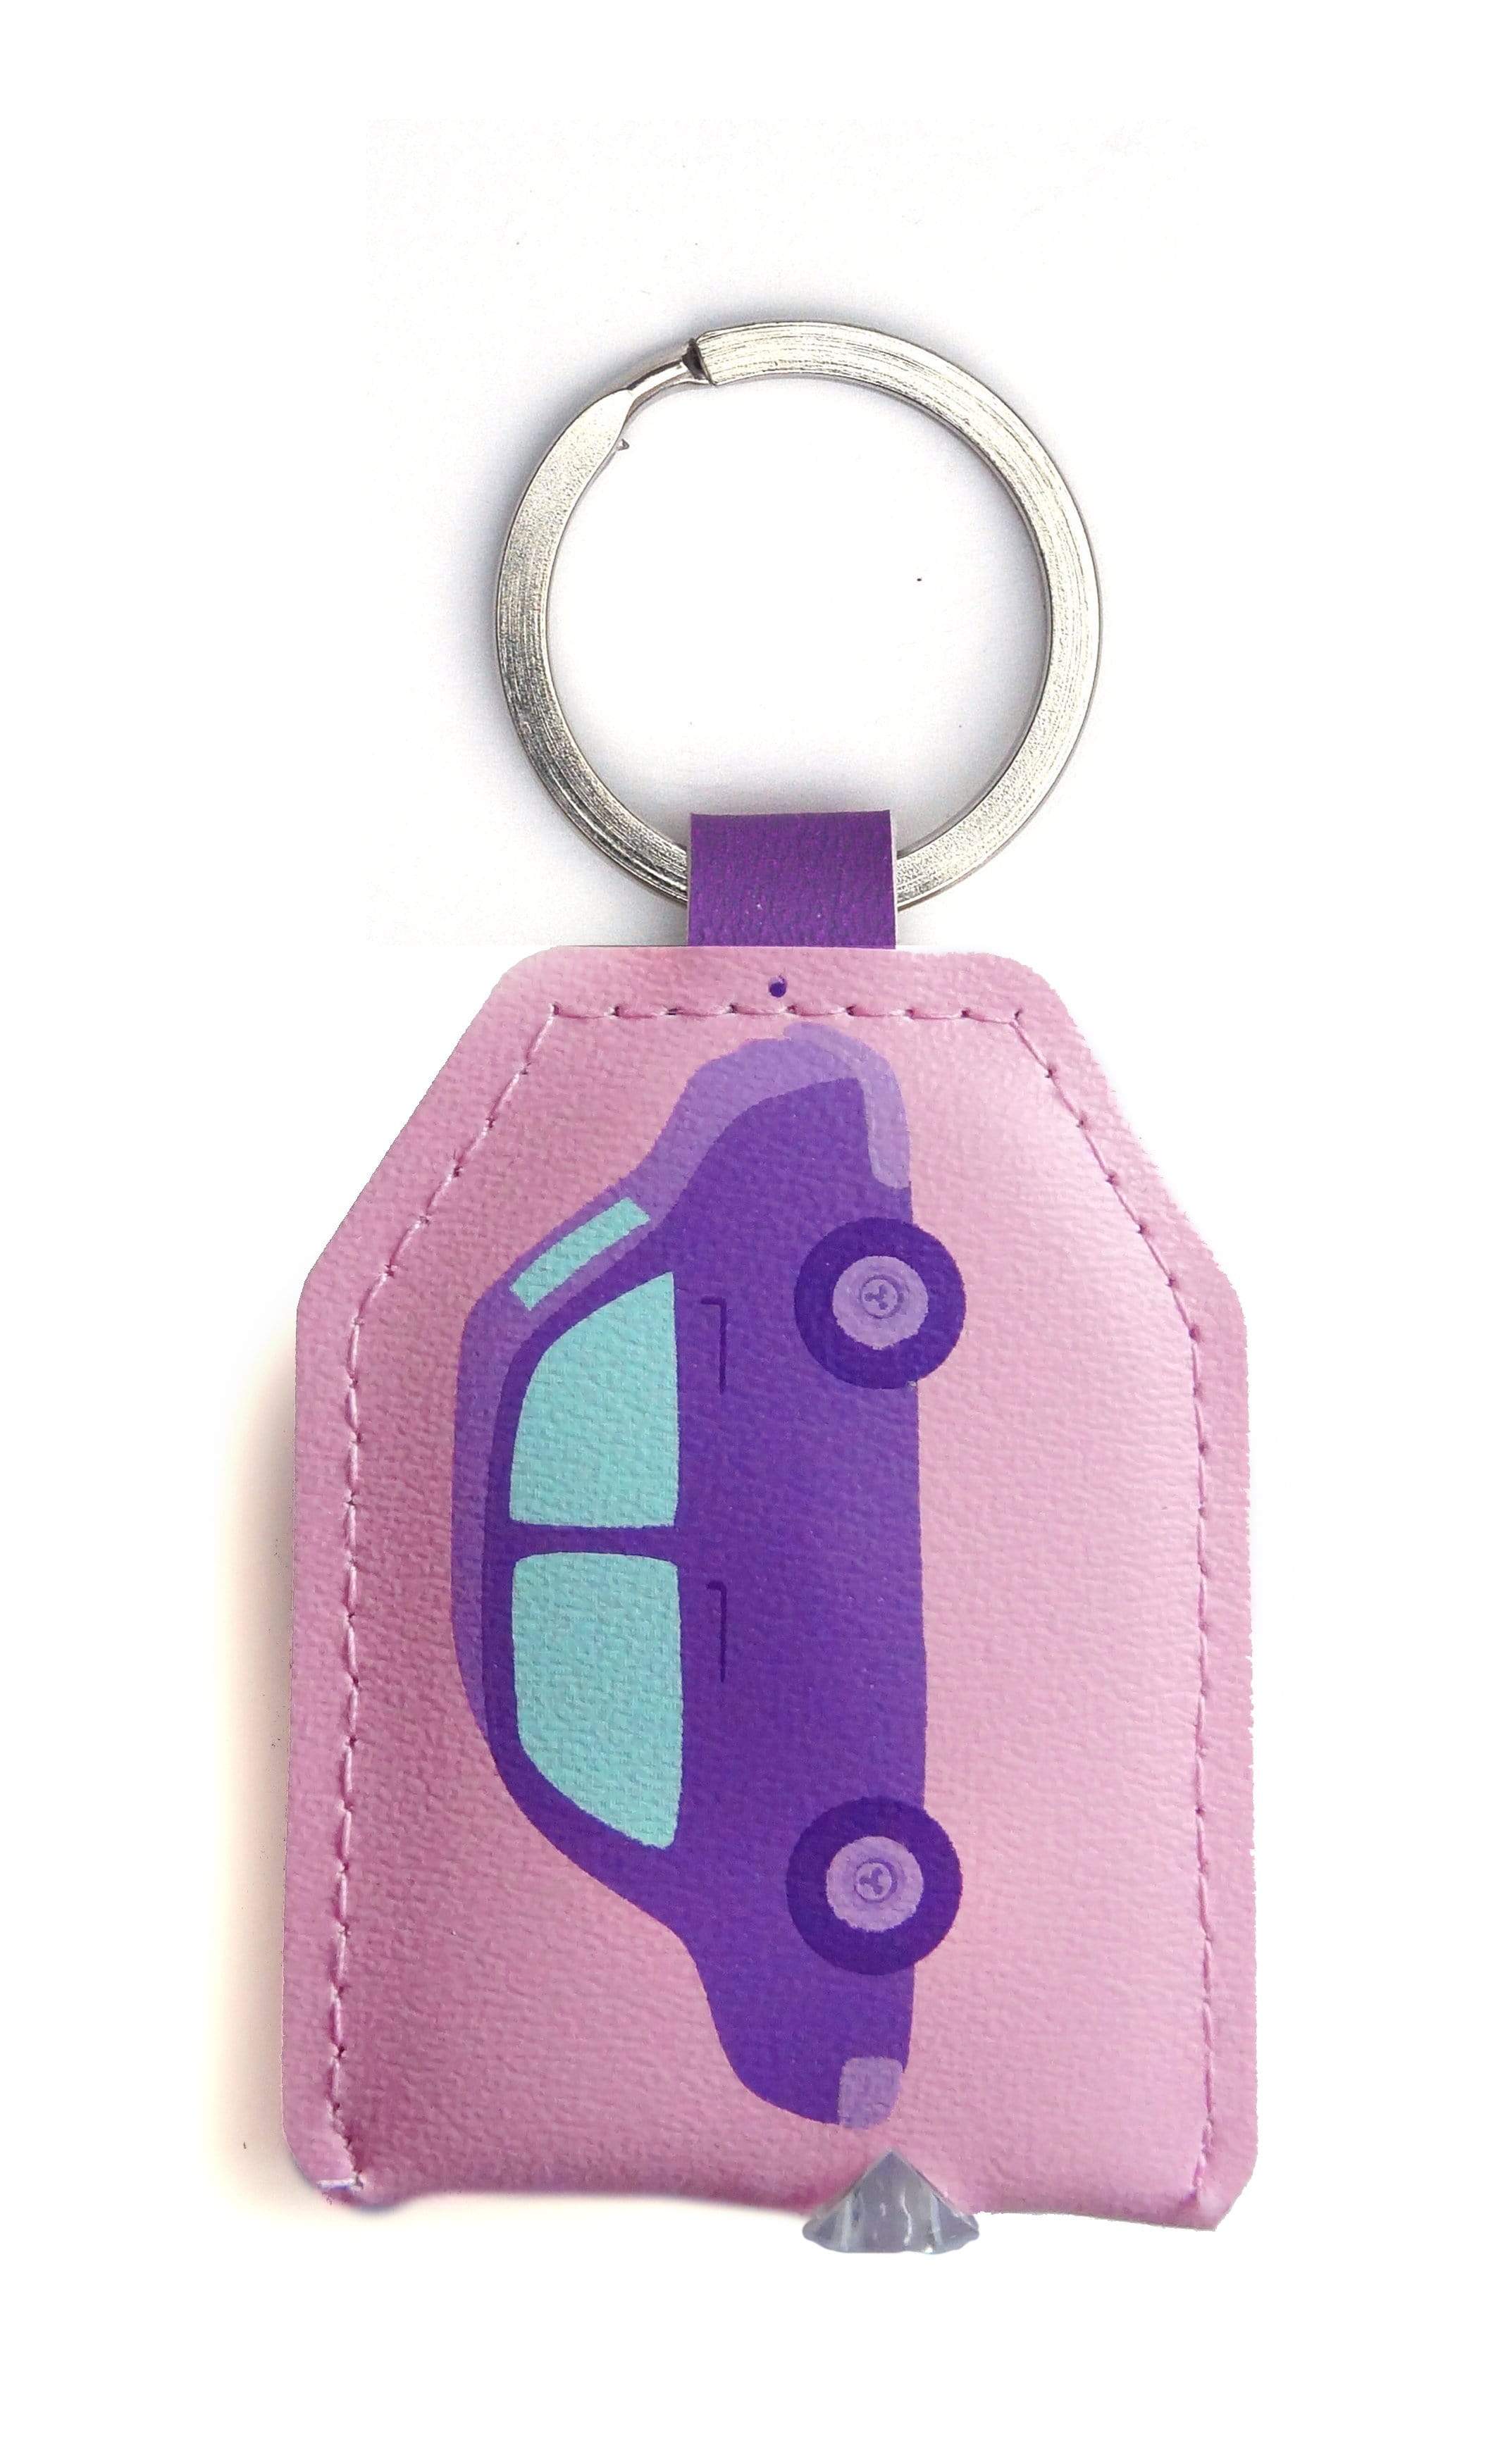 Curios Gifts Keyring Slogans Keylight - Keyring with Built-in LED Torch - Pink Car